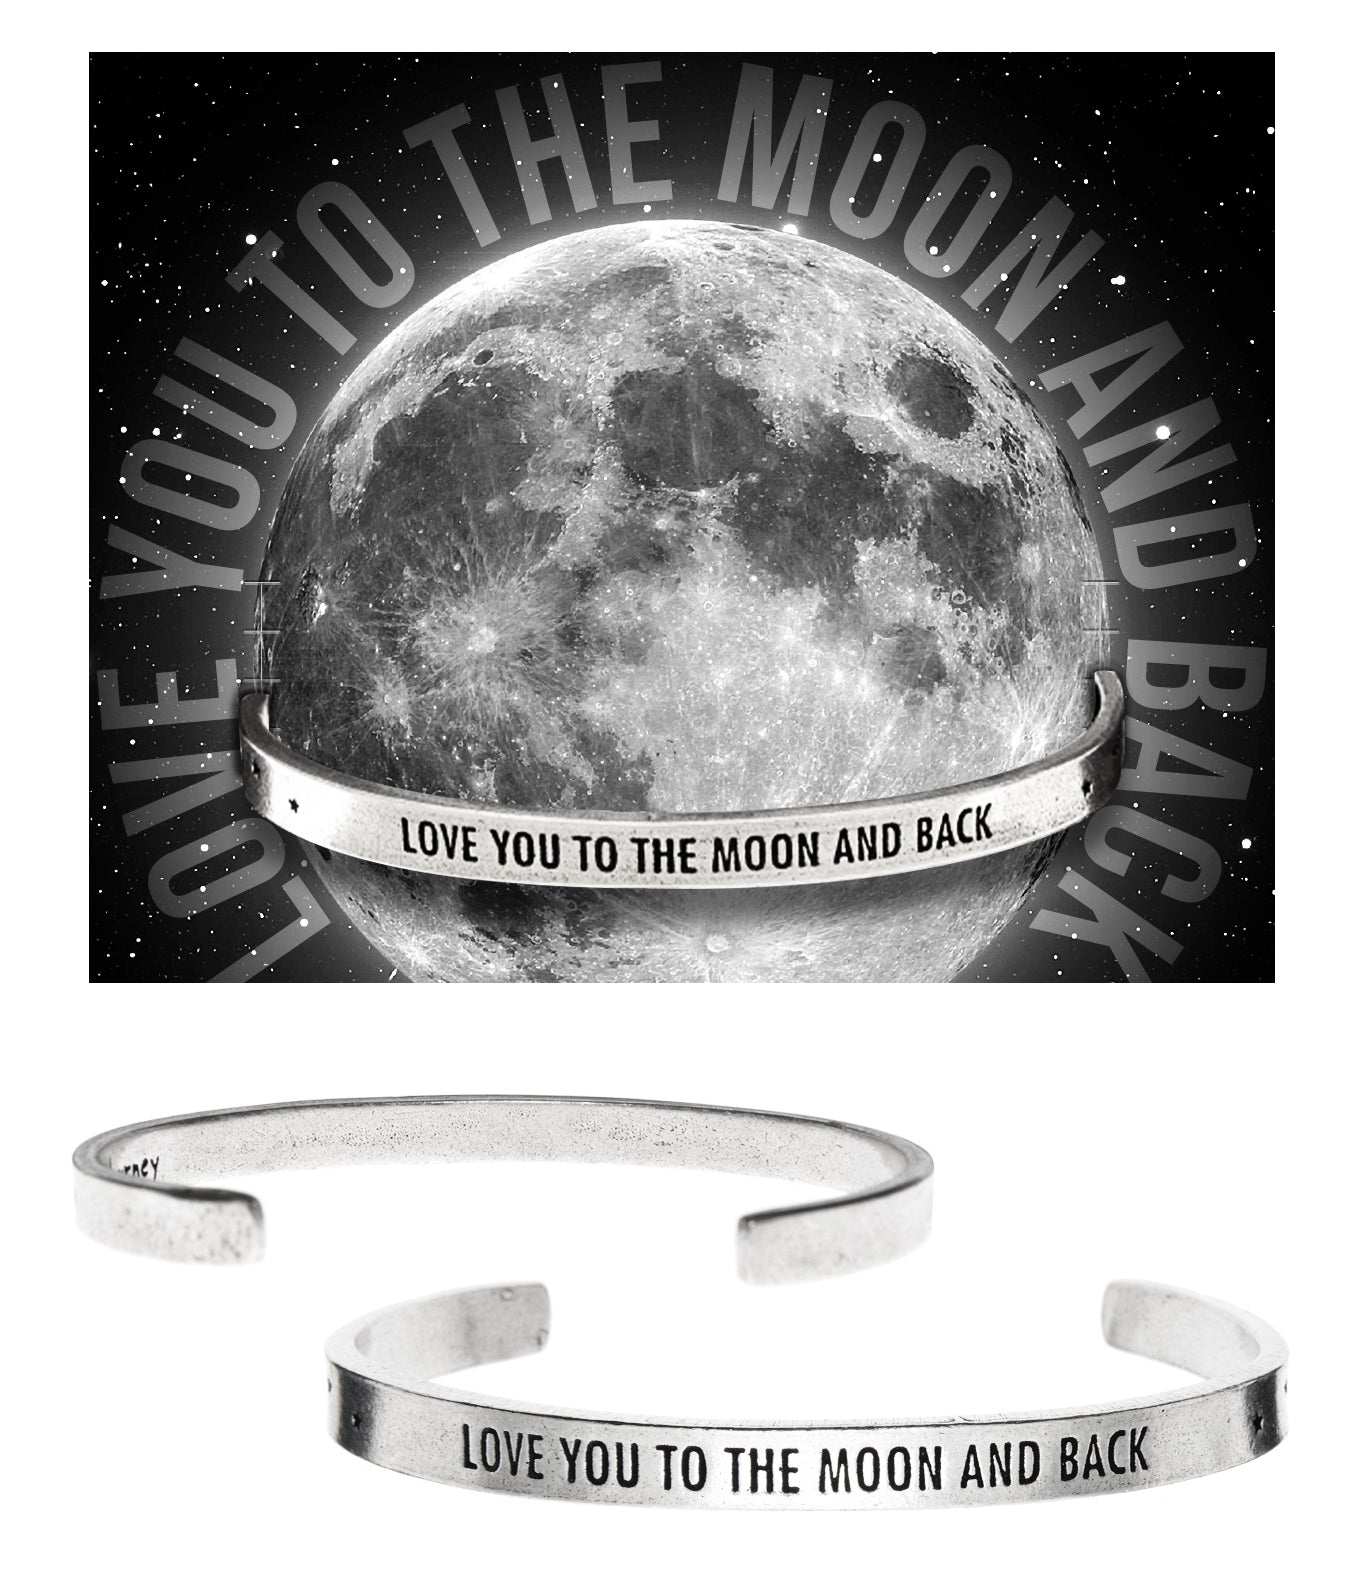 Love You to the Moon and Back Quotable Cuff Bracelet with backer card